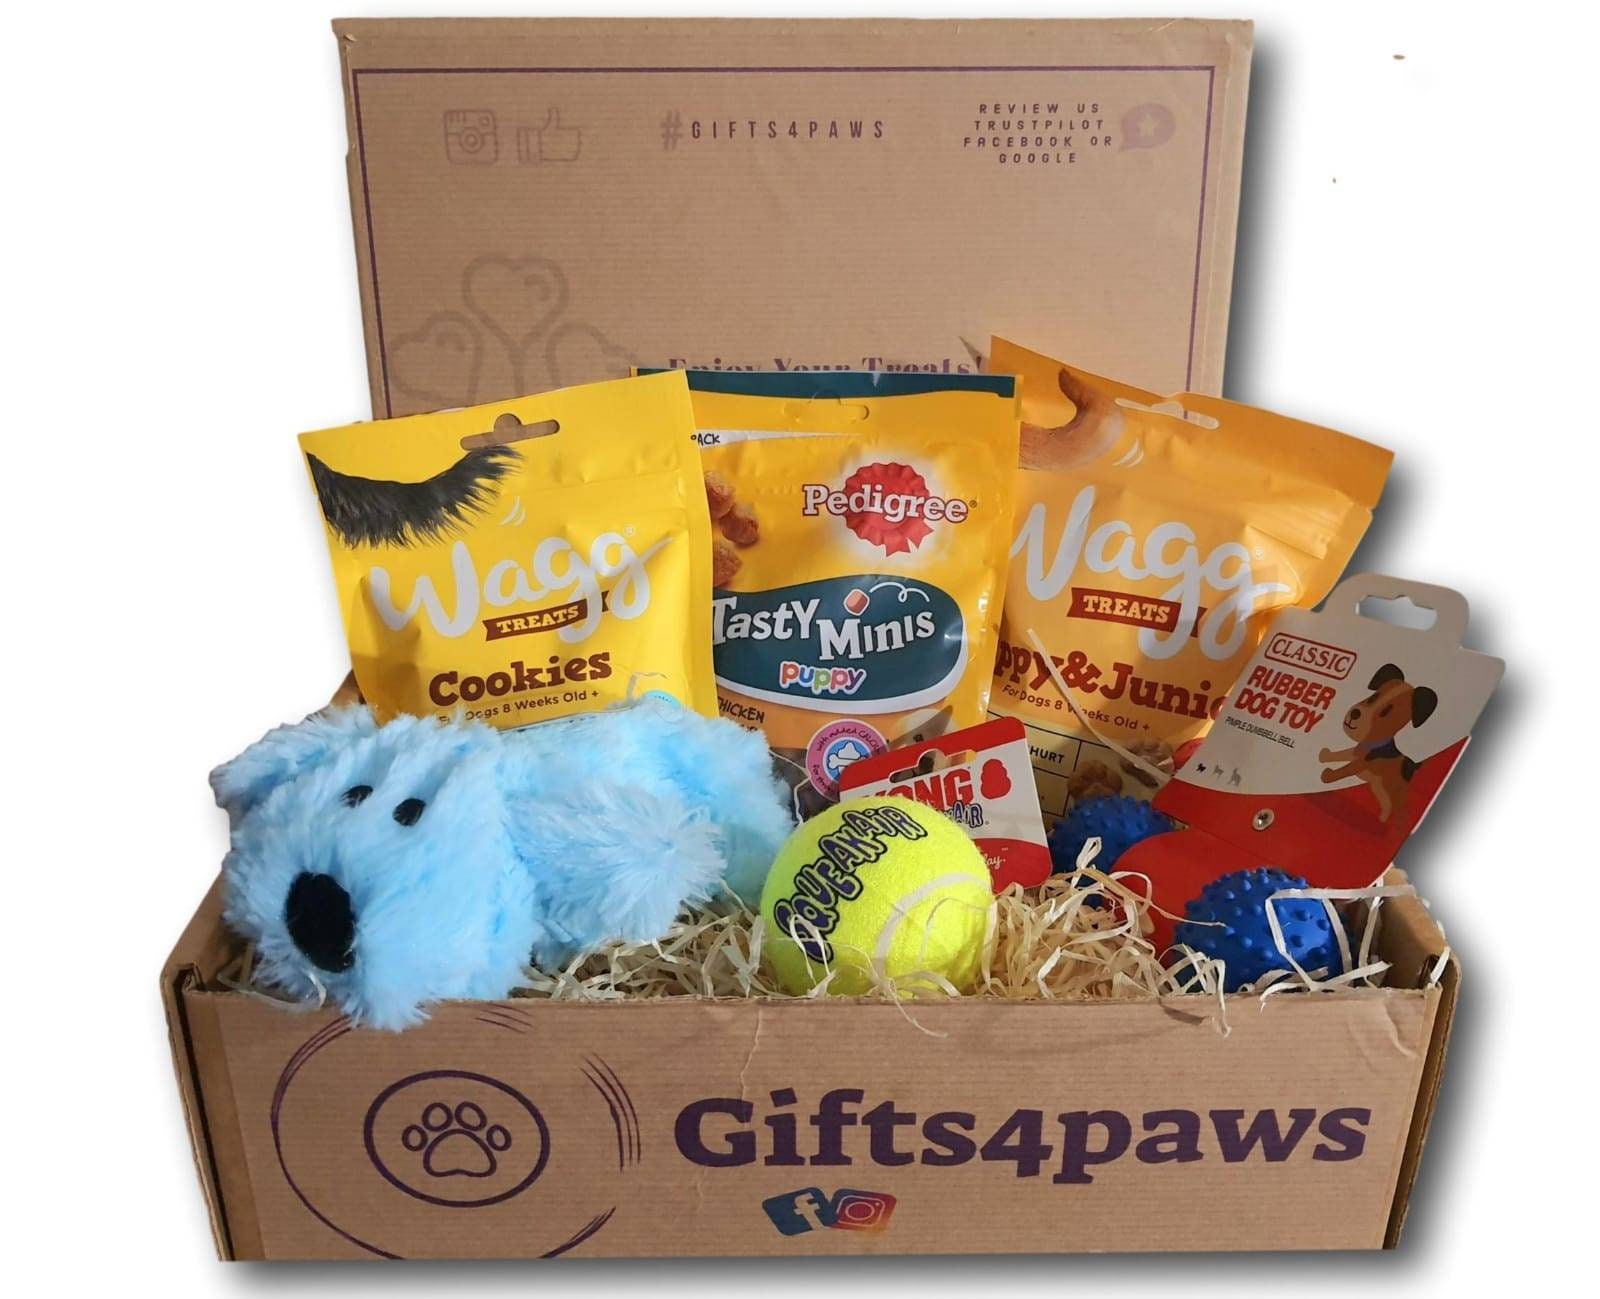 New Puppy Gift Box / Puppy Toys / Puppy Treats / Gifts for